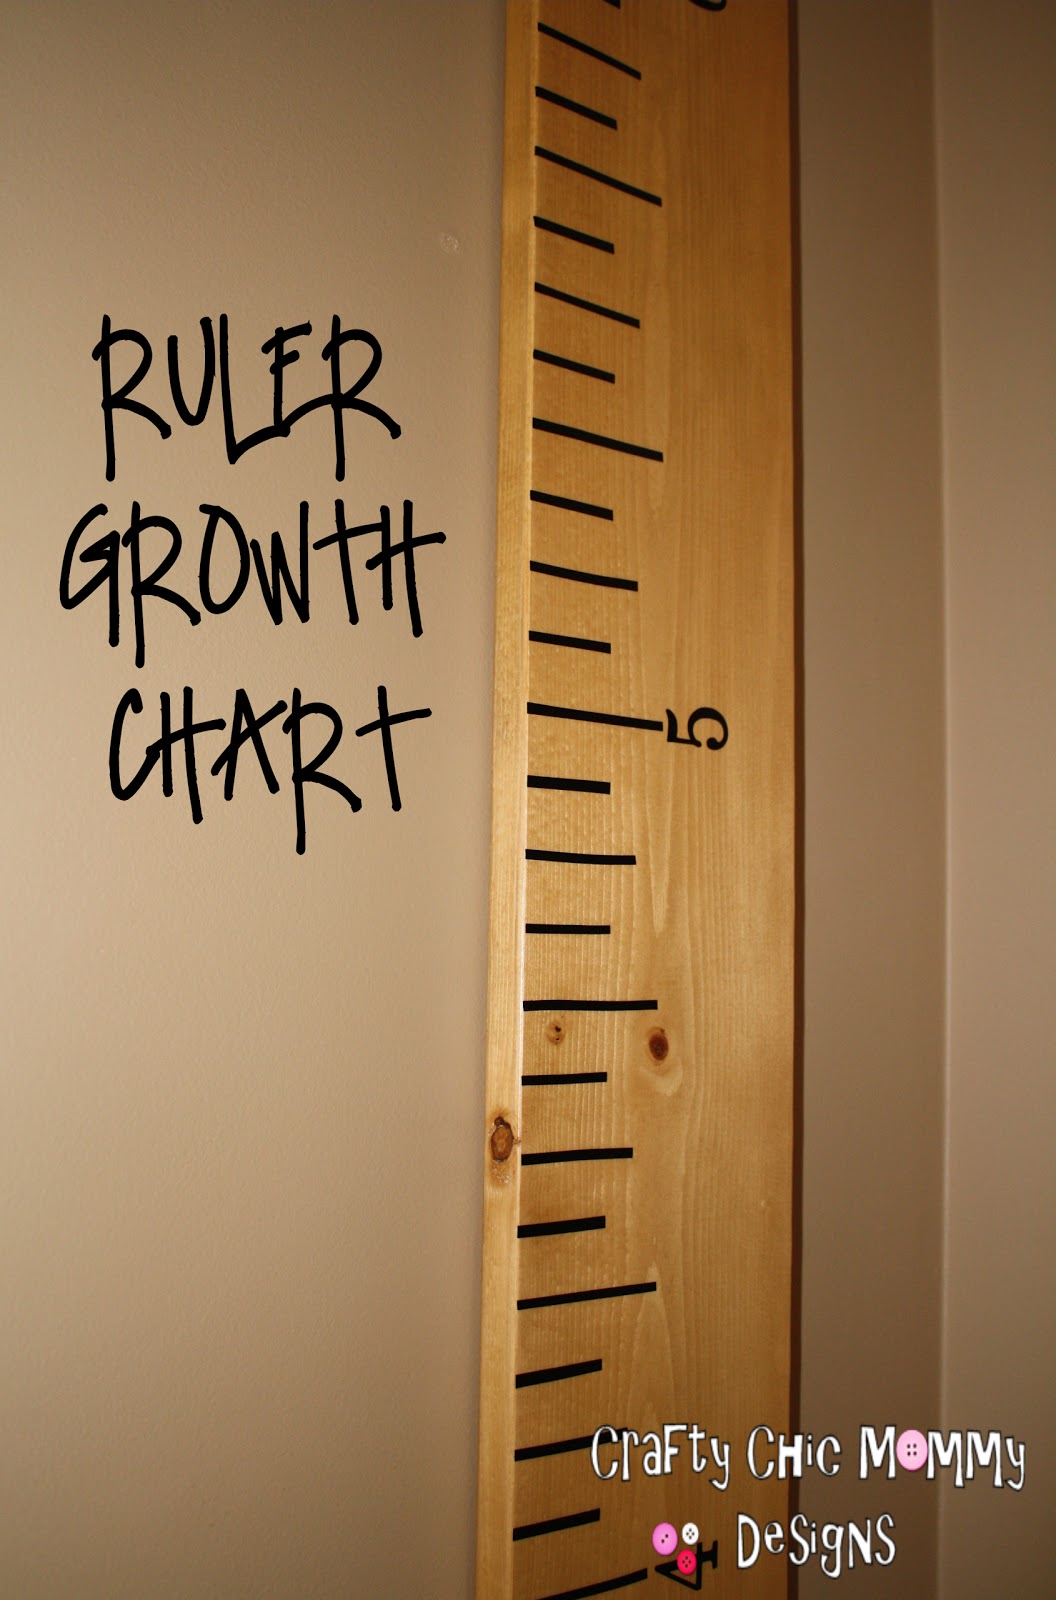 Large Ruler Growth Chart